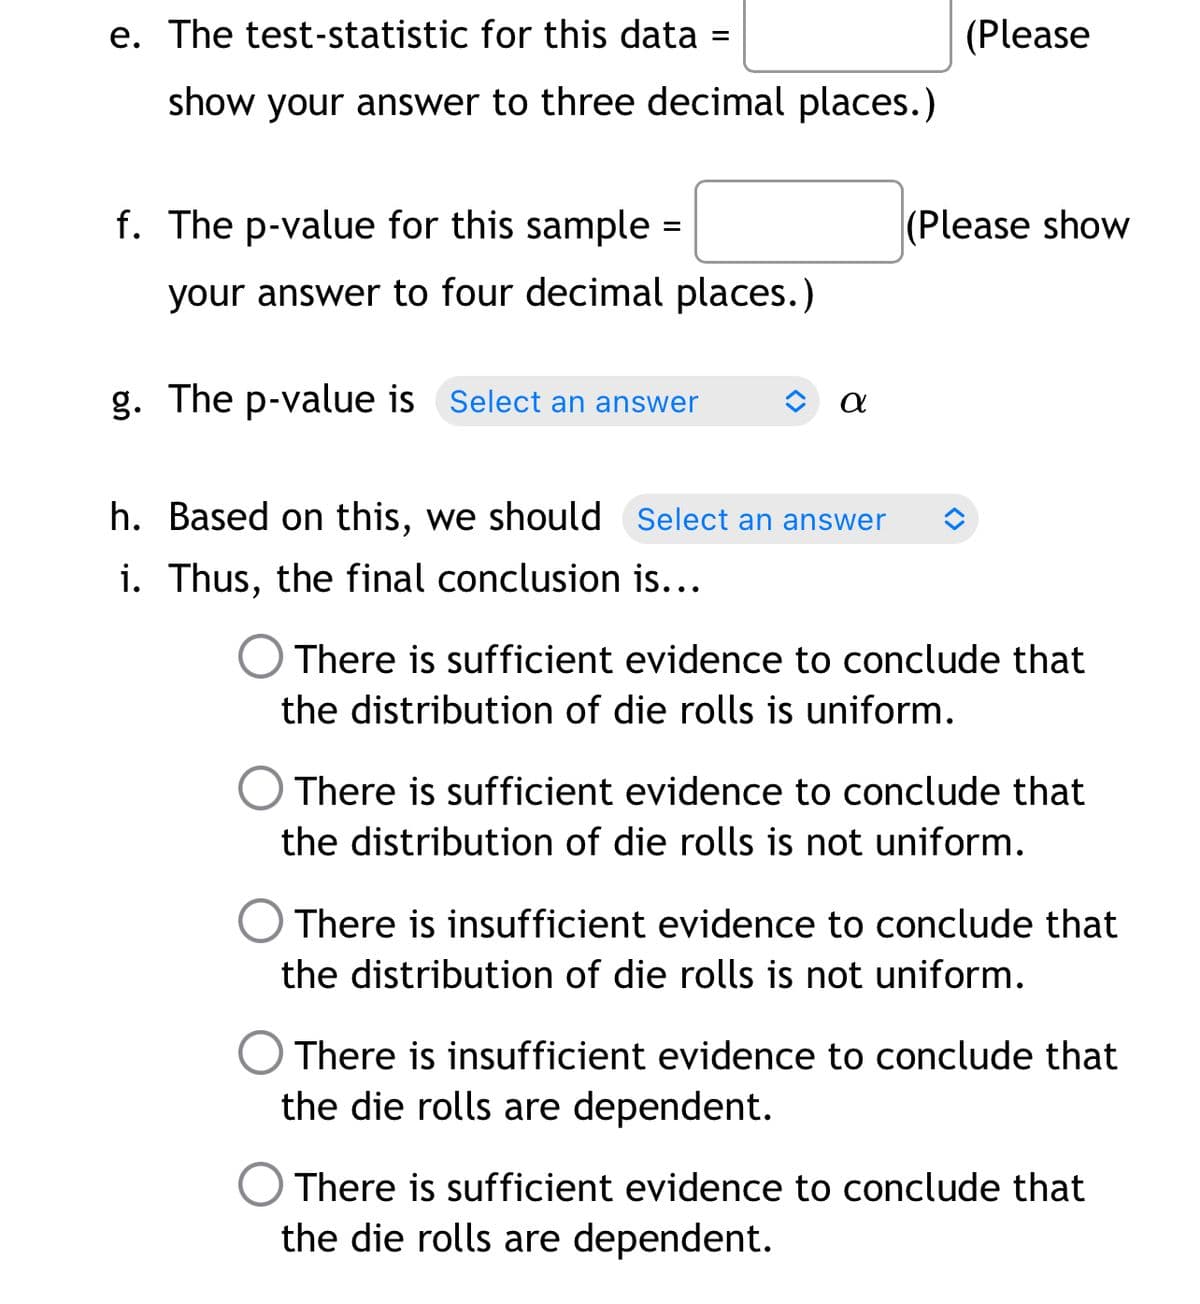 e. The test-statistic for this data
(Please
show your answer to three decimal places.)
f. The p-value for this sample =
(Please show
your answer to four decimal places.)
g. The p-value is Select an answer
h. Based on this, we should Select an answer
i. Thus, the final conclusion is...
There is sufficient evidence to conclude that
the distribution of die rolls is uniform.
There is sufficient evidence to conclude that
the distribution of die rolls is not uniform.
There is insufficient evidence to conclude that
the distribution of die rolls is not uniform.
There is insufficient evidence to conclude that
the die rolls are dependent.
O There is sufficient evidence to conclude that
the die rolls are dependent.
